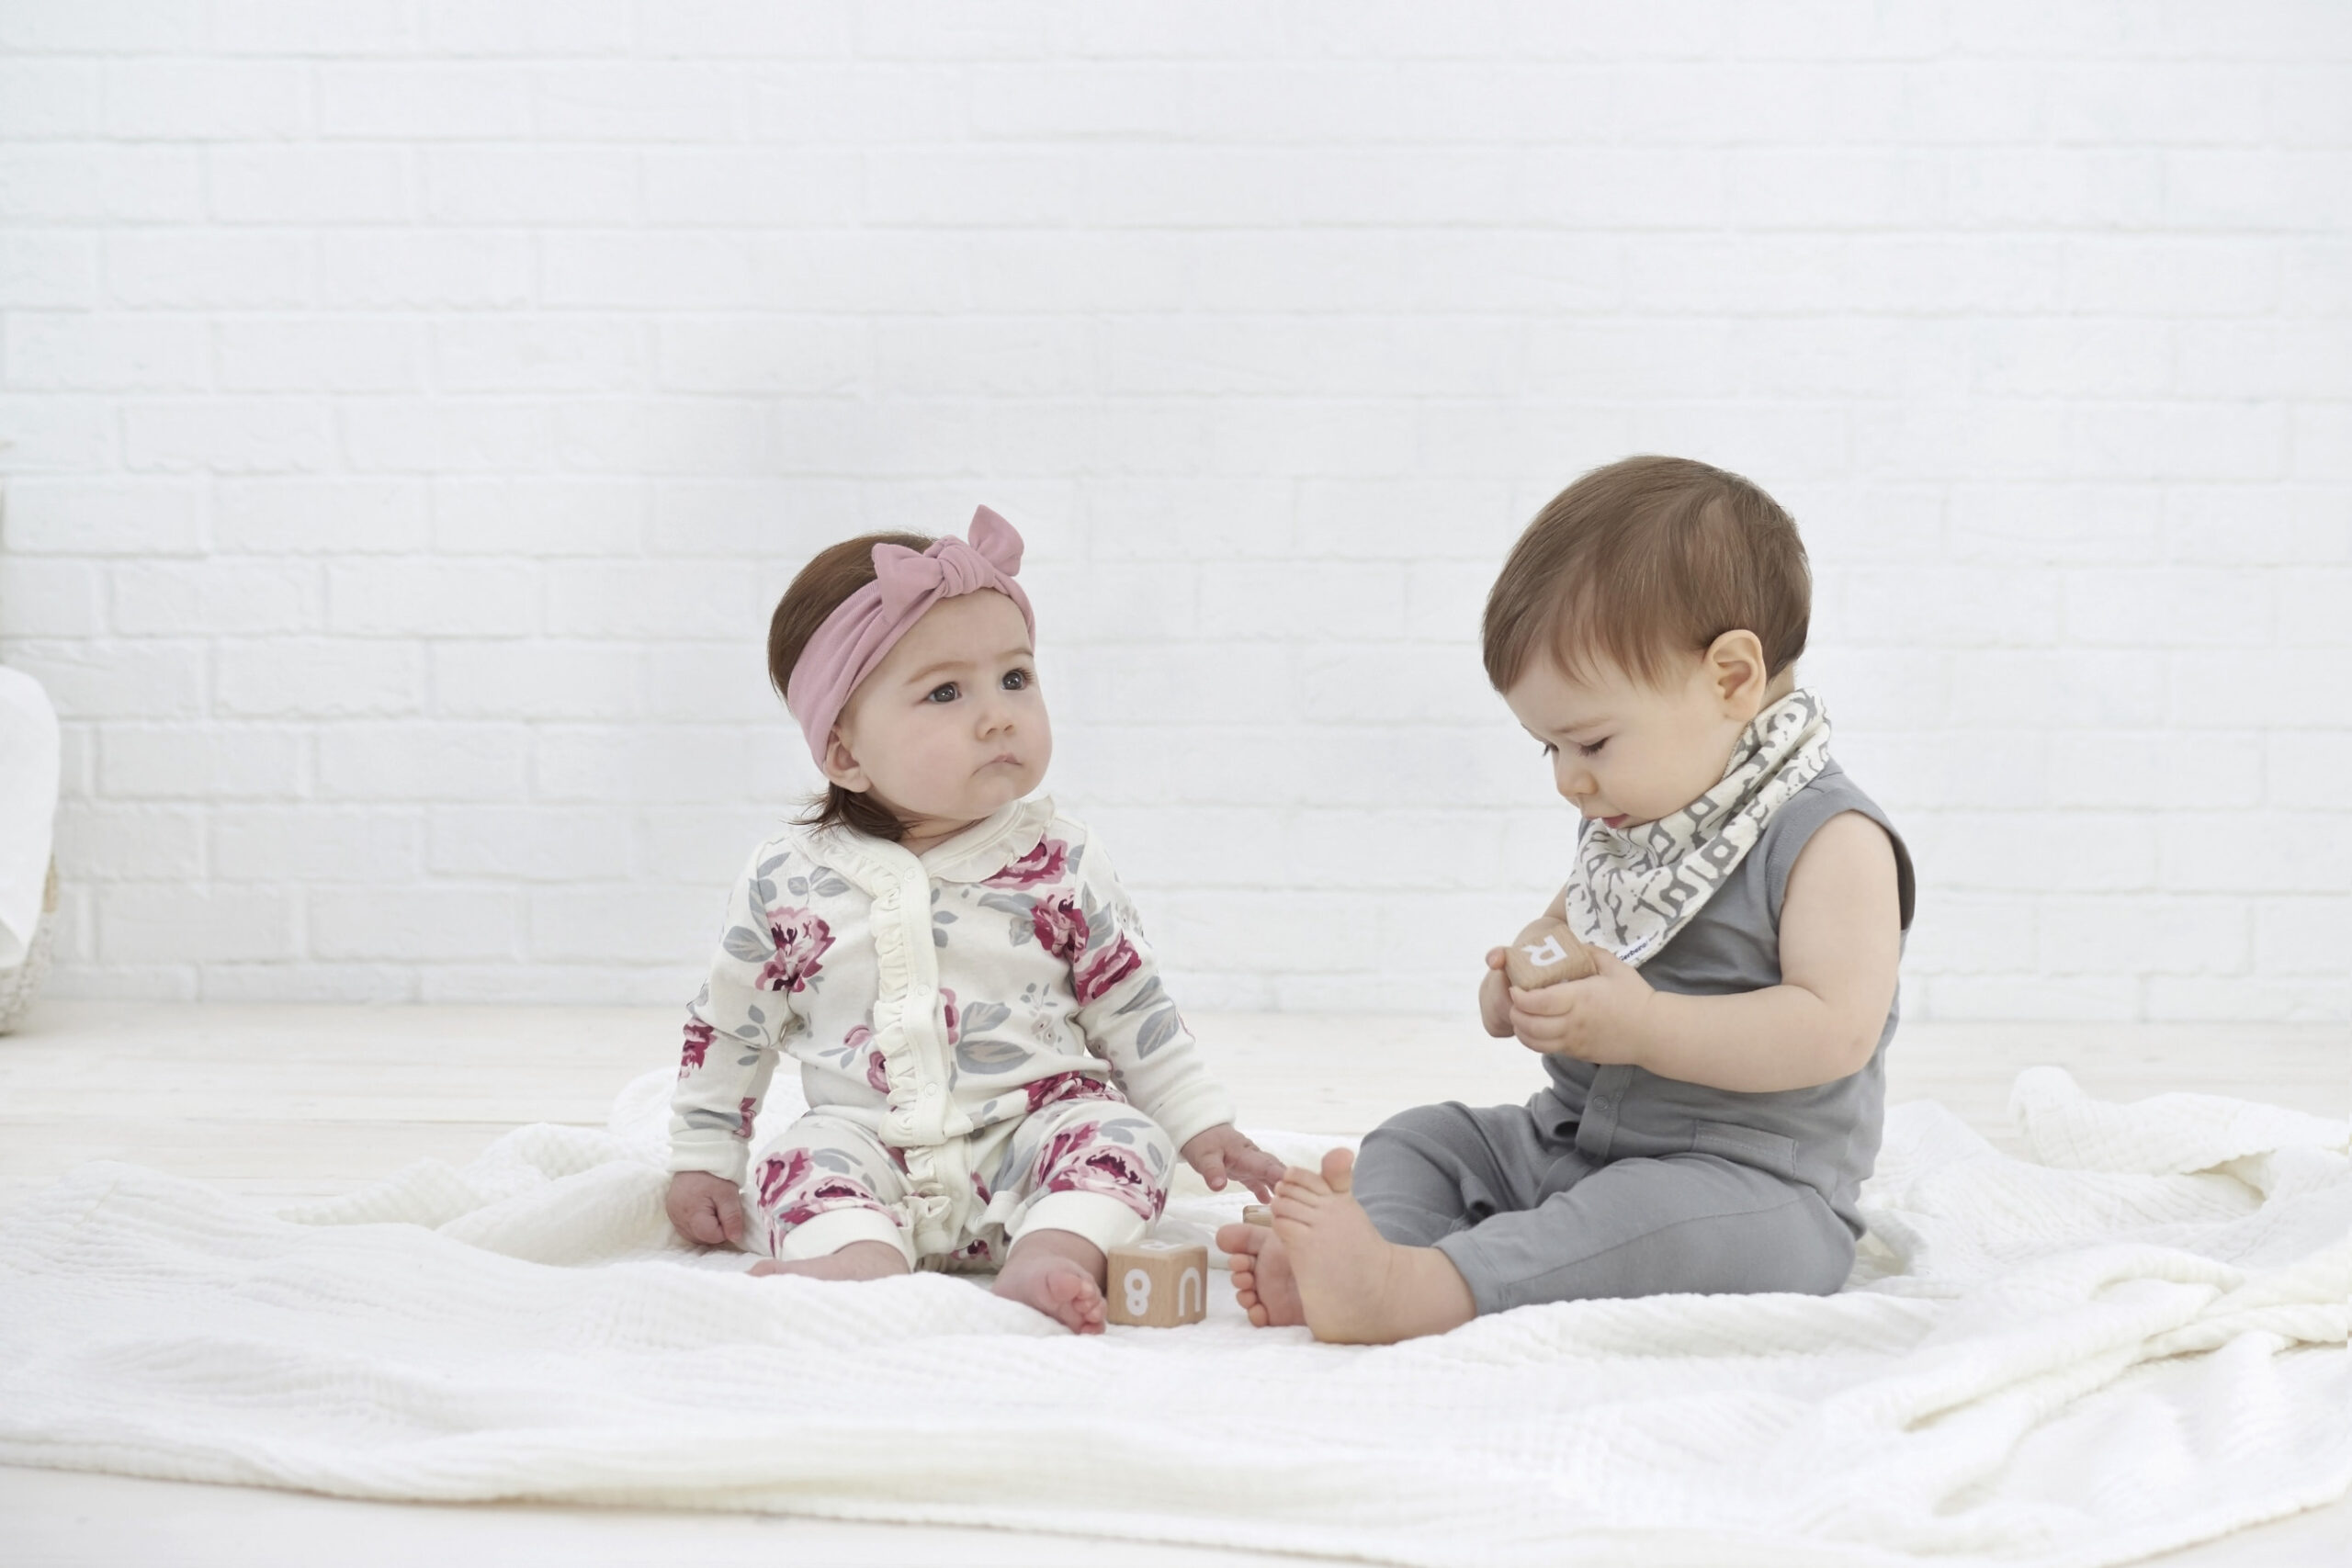 Gerber Childrenswear Launches Elevated Line of Baby Essentials